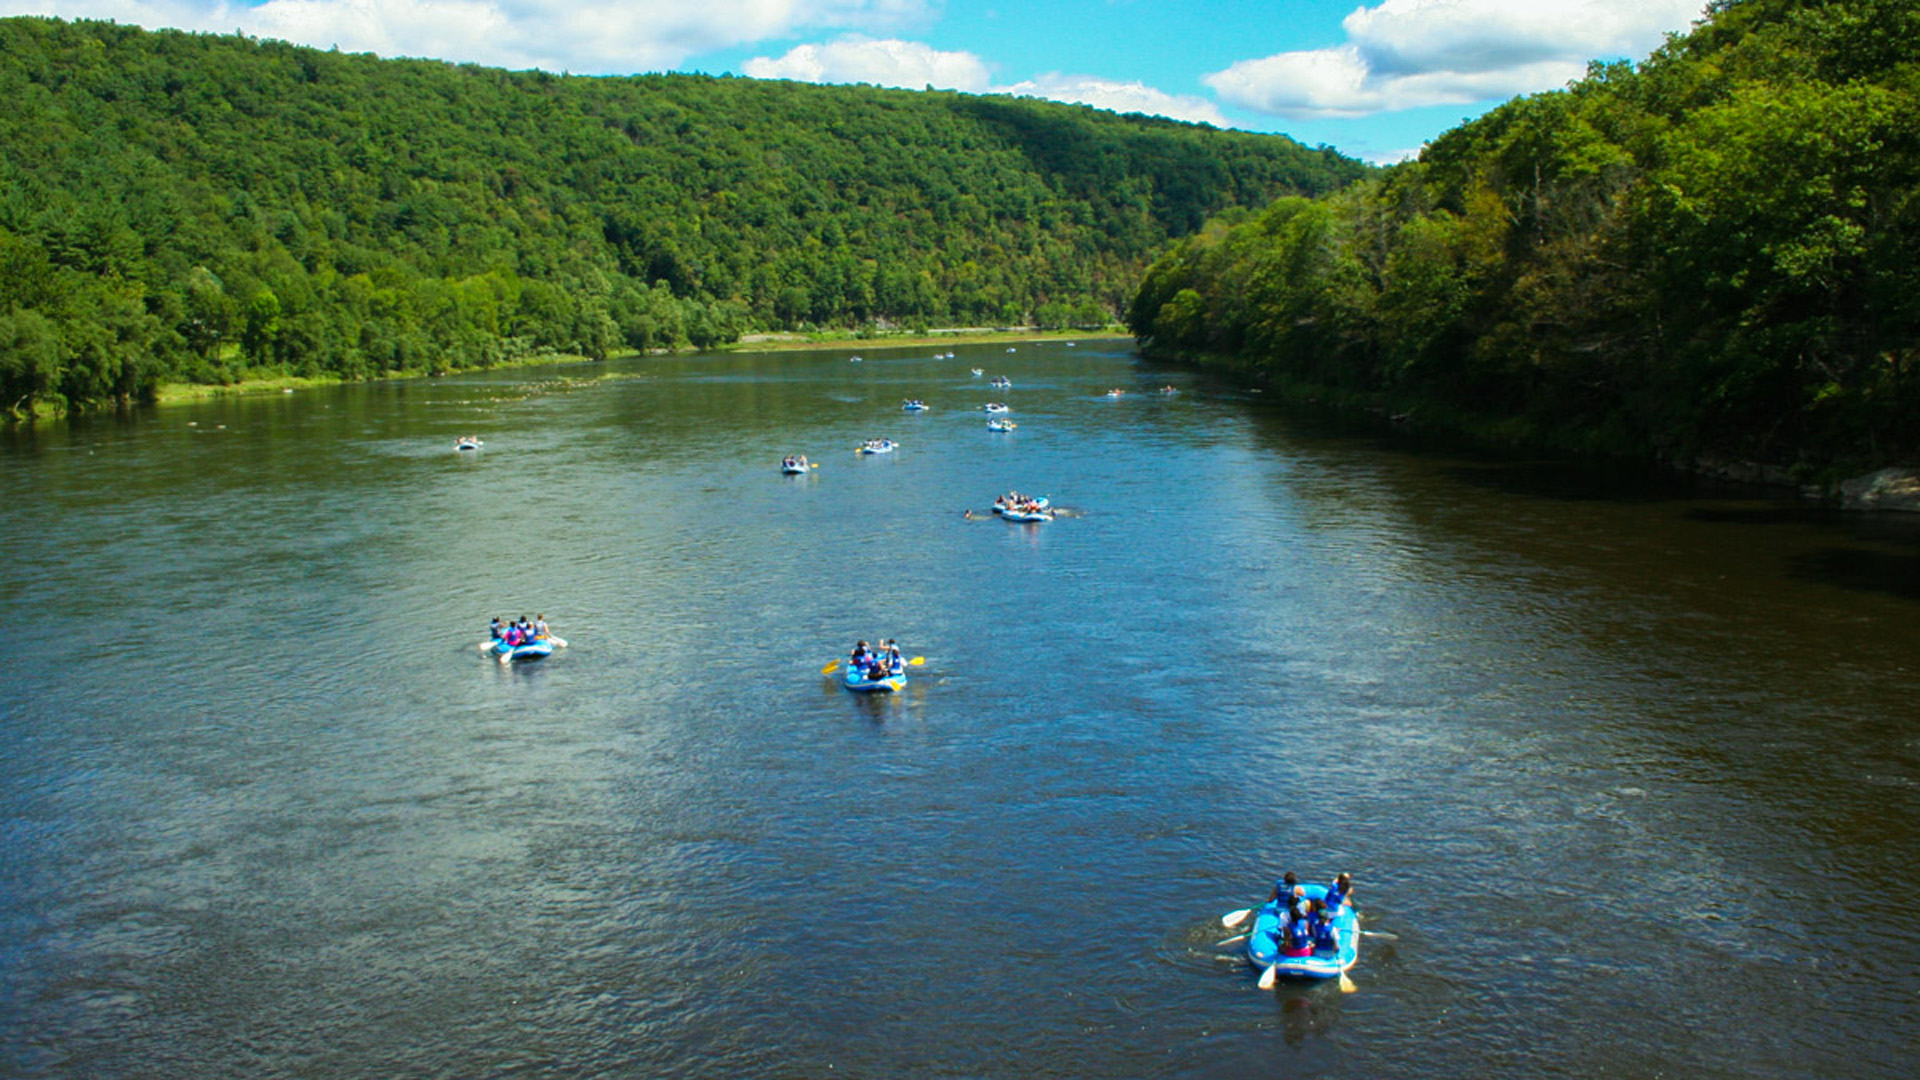 several groups on rafts on Delaware River with green tree views Indian Head Canoeing Rafting Kayaking Tubing Delaware River